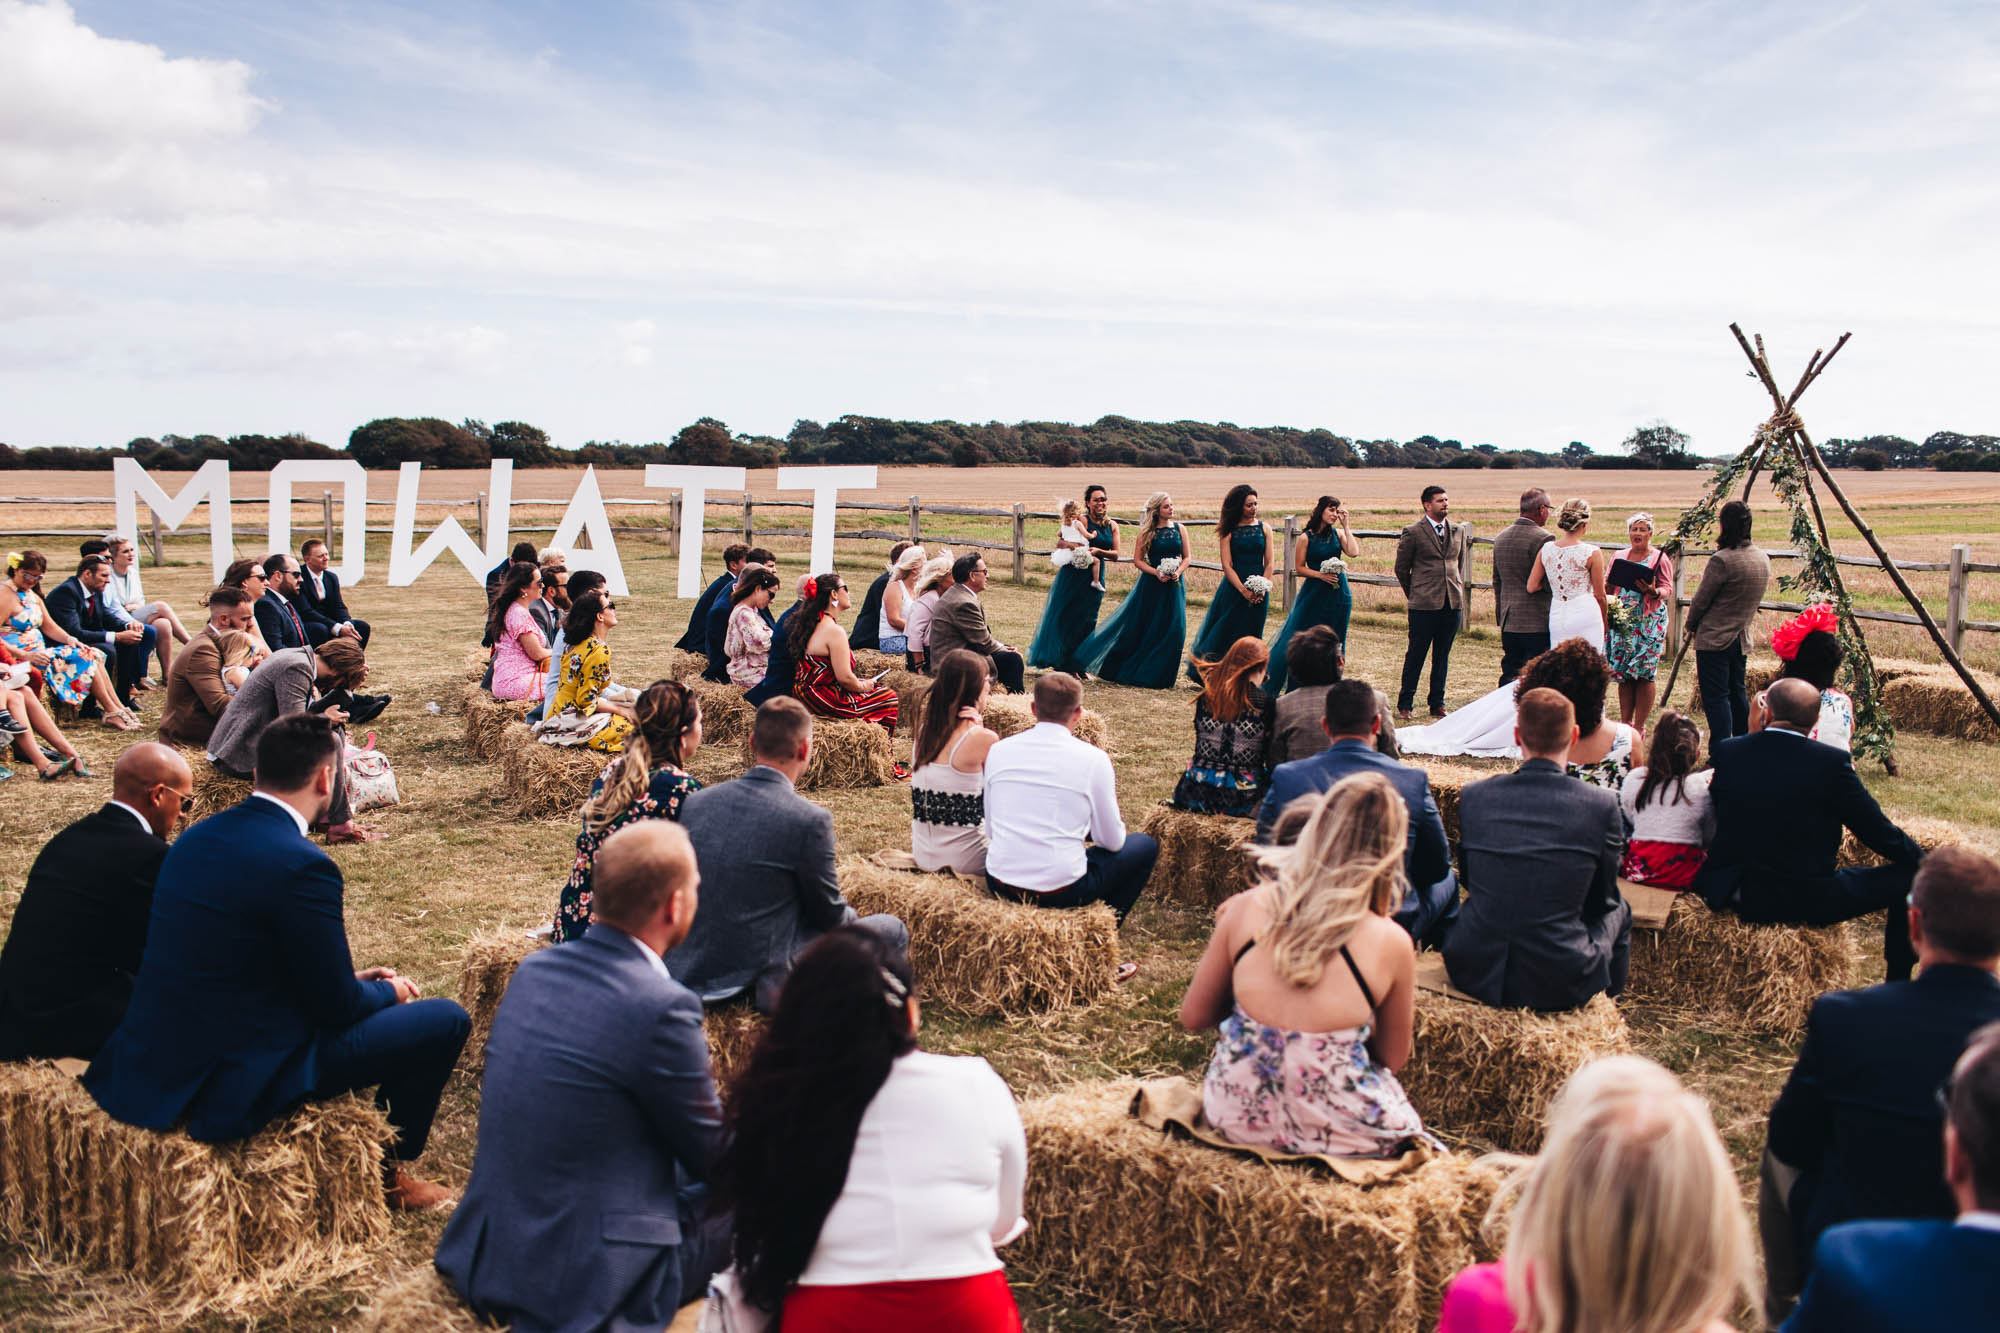 wide angle scene of wedding guests on hay bales and the wedding party waiting for the ceremony